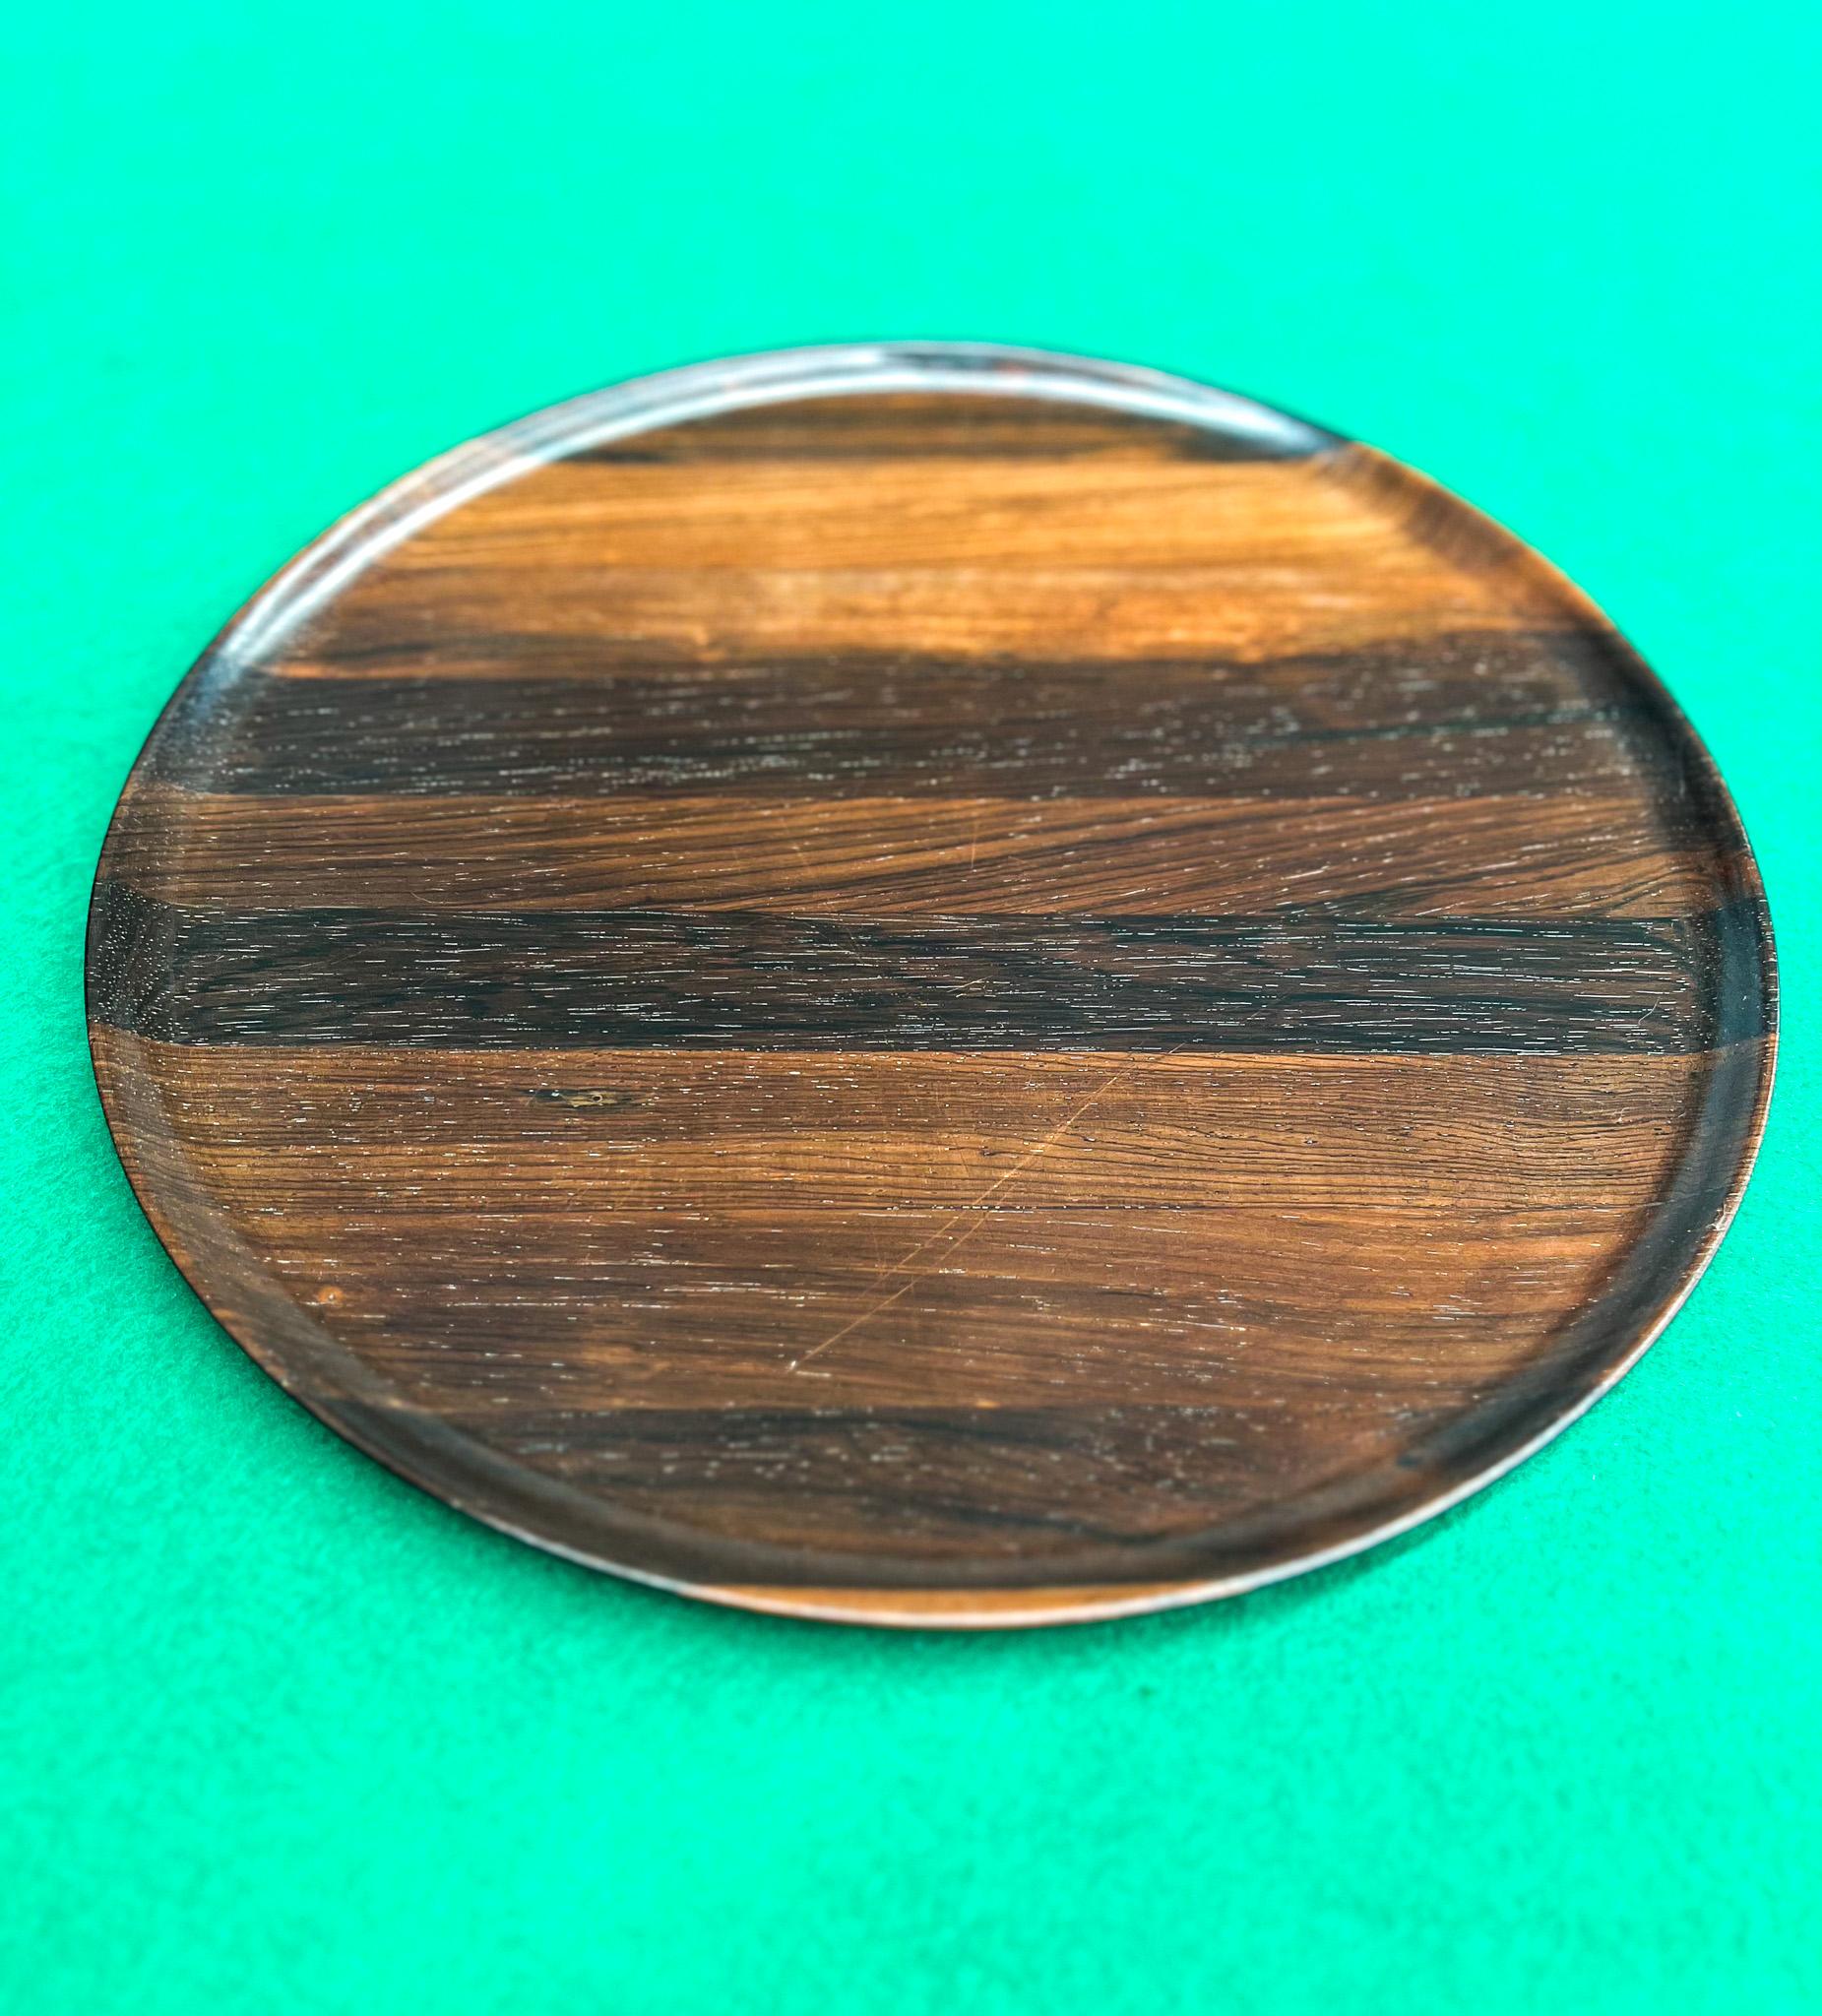 Available today, this midcentury Brazilian Modern Rosewood decorative plate was designed by Tropic Art and made in Brazil circa 1960. Handcrafted from hard Rosewood (known as Jacaranda), the plate features a circular shapes with round edges. The